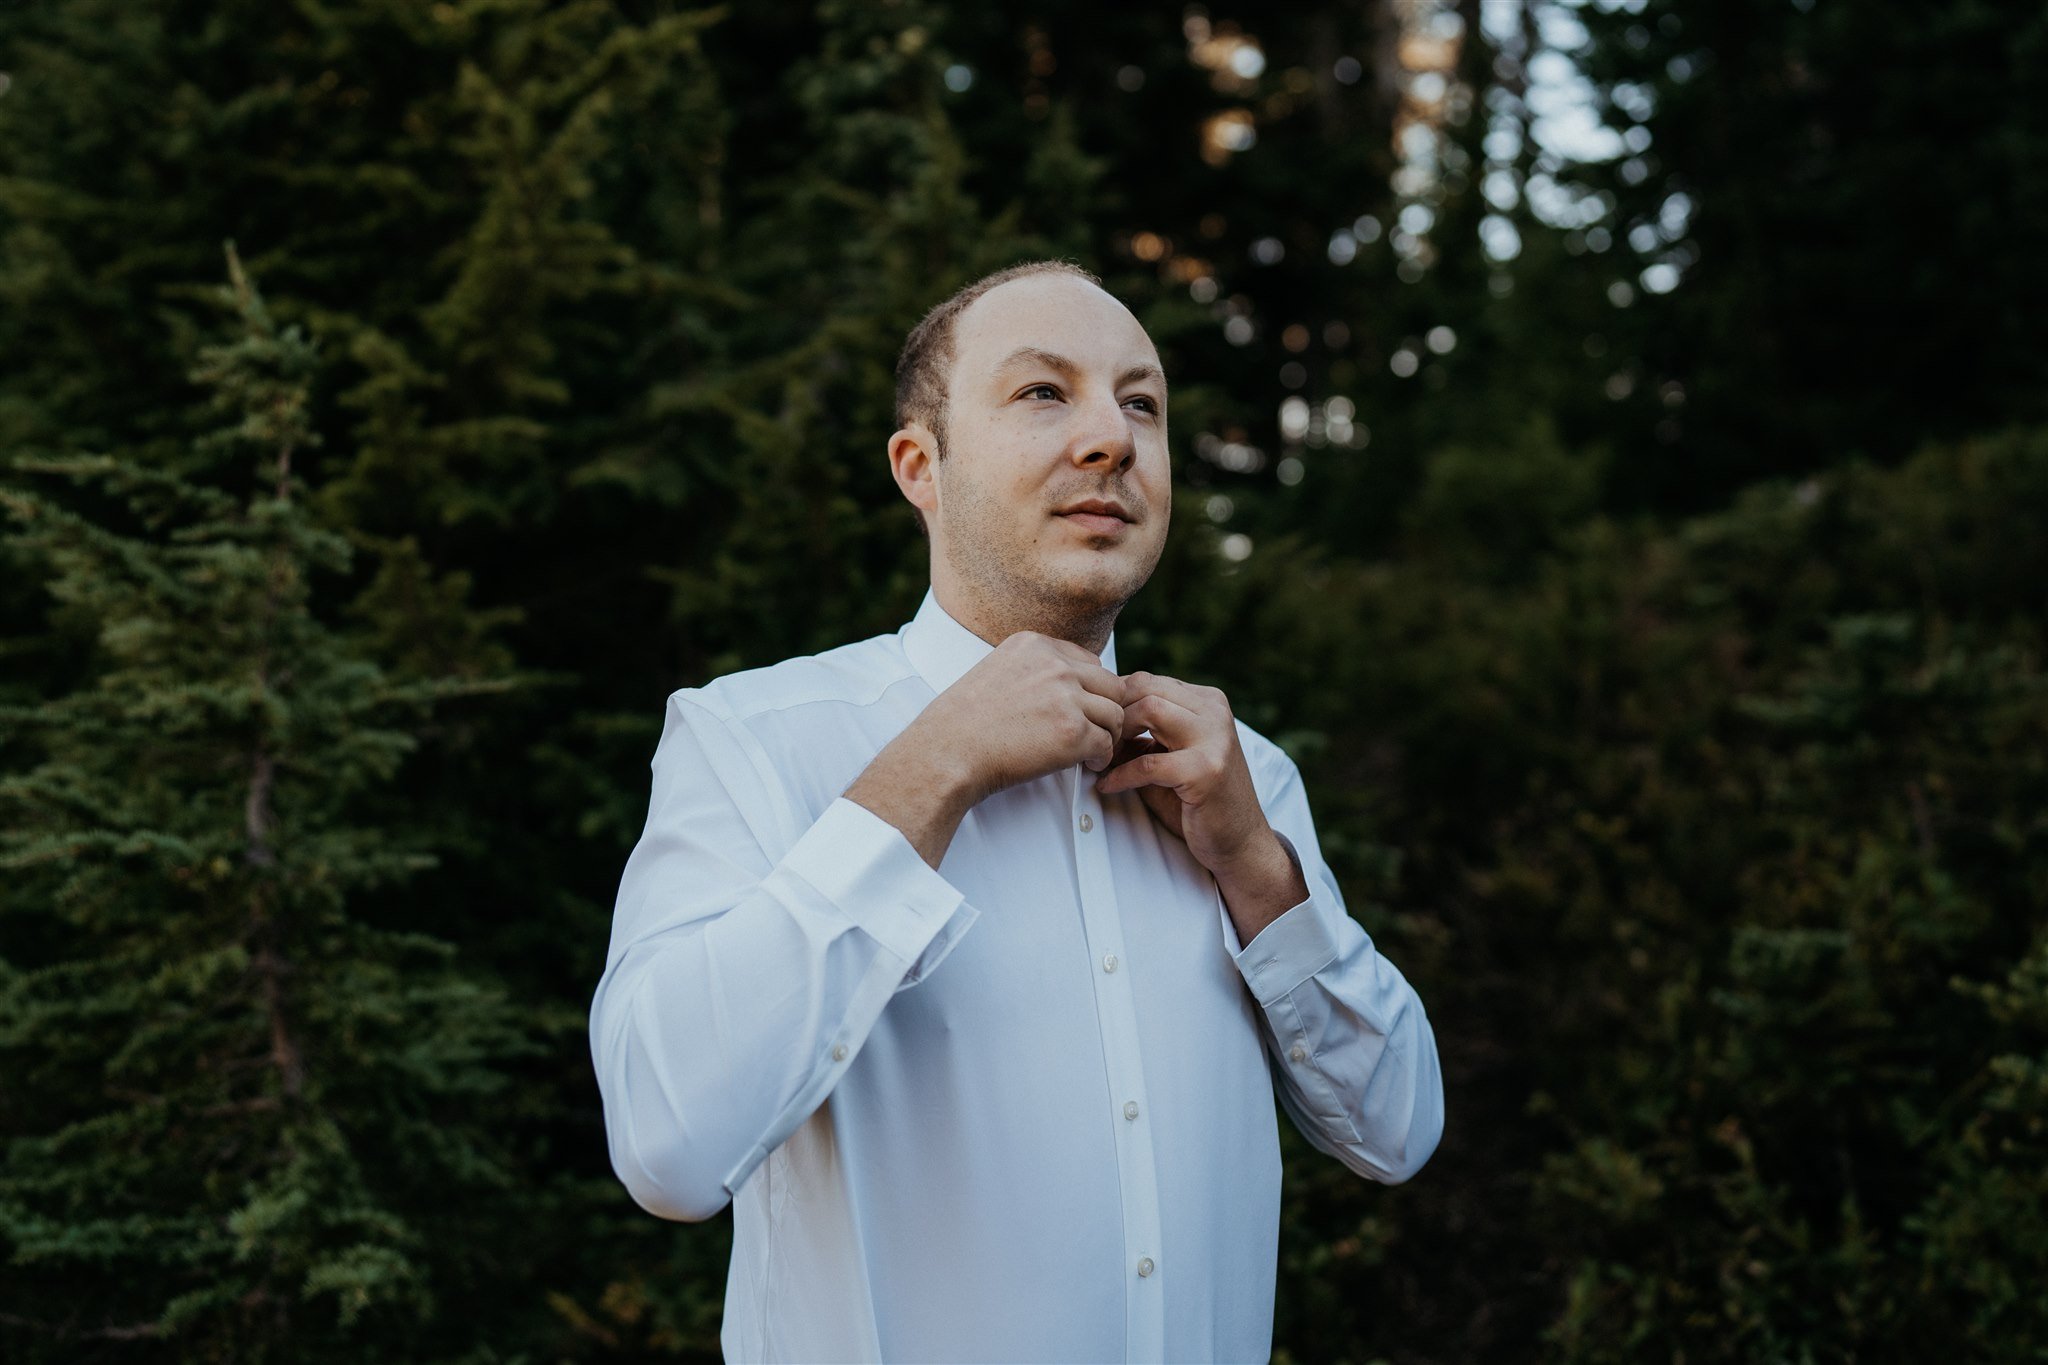 Groom buttoning shirt while getting ready at Mt Rainier National Park